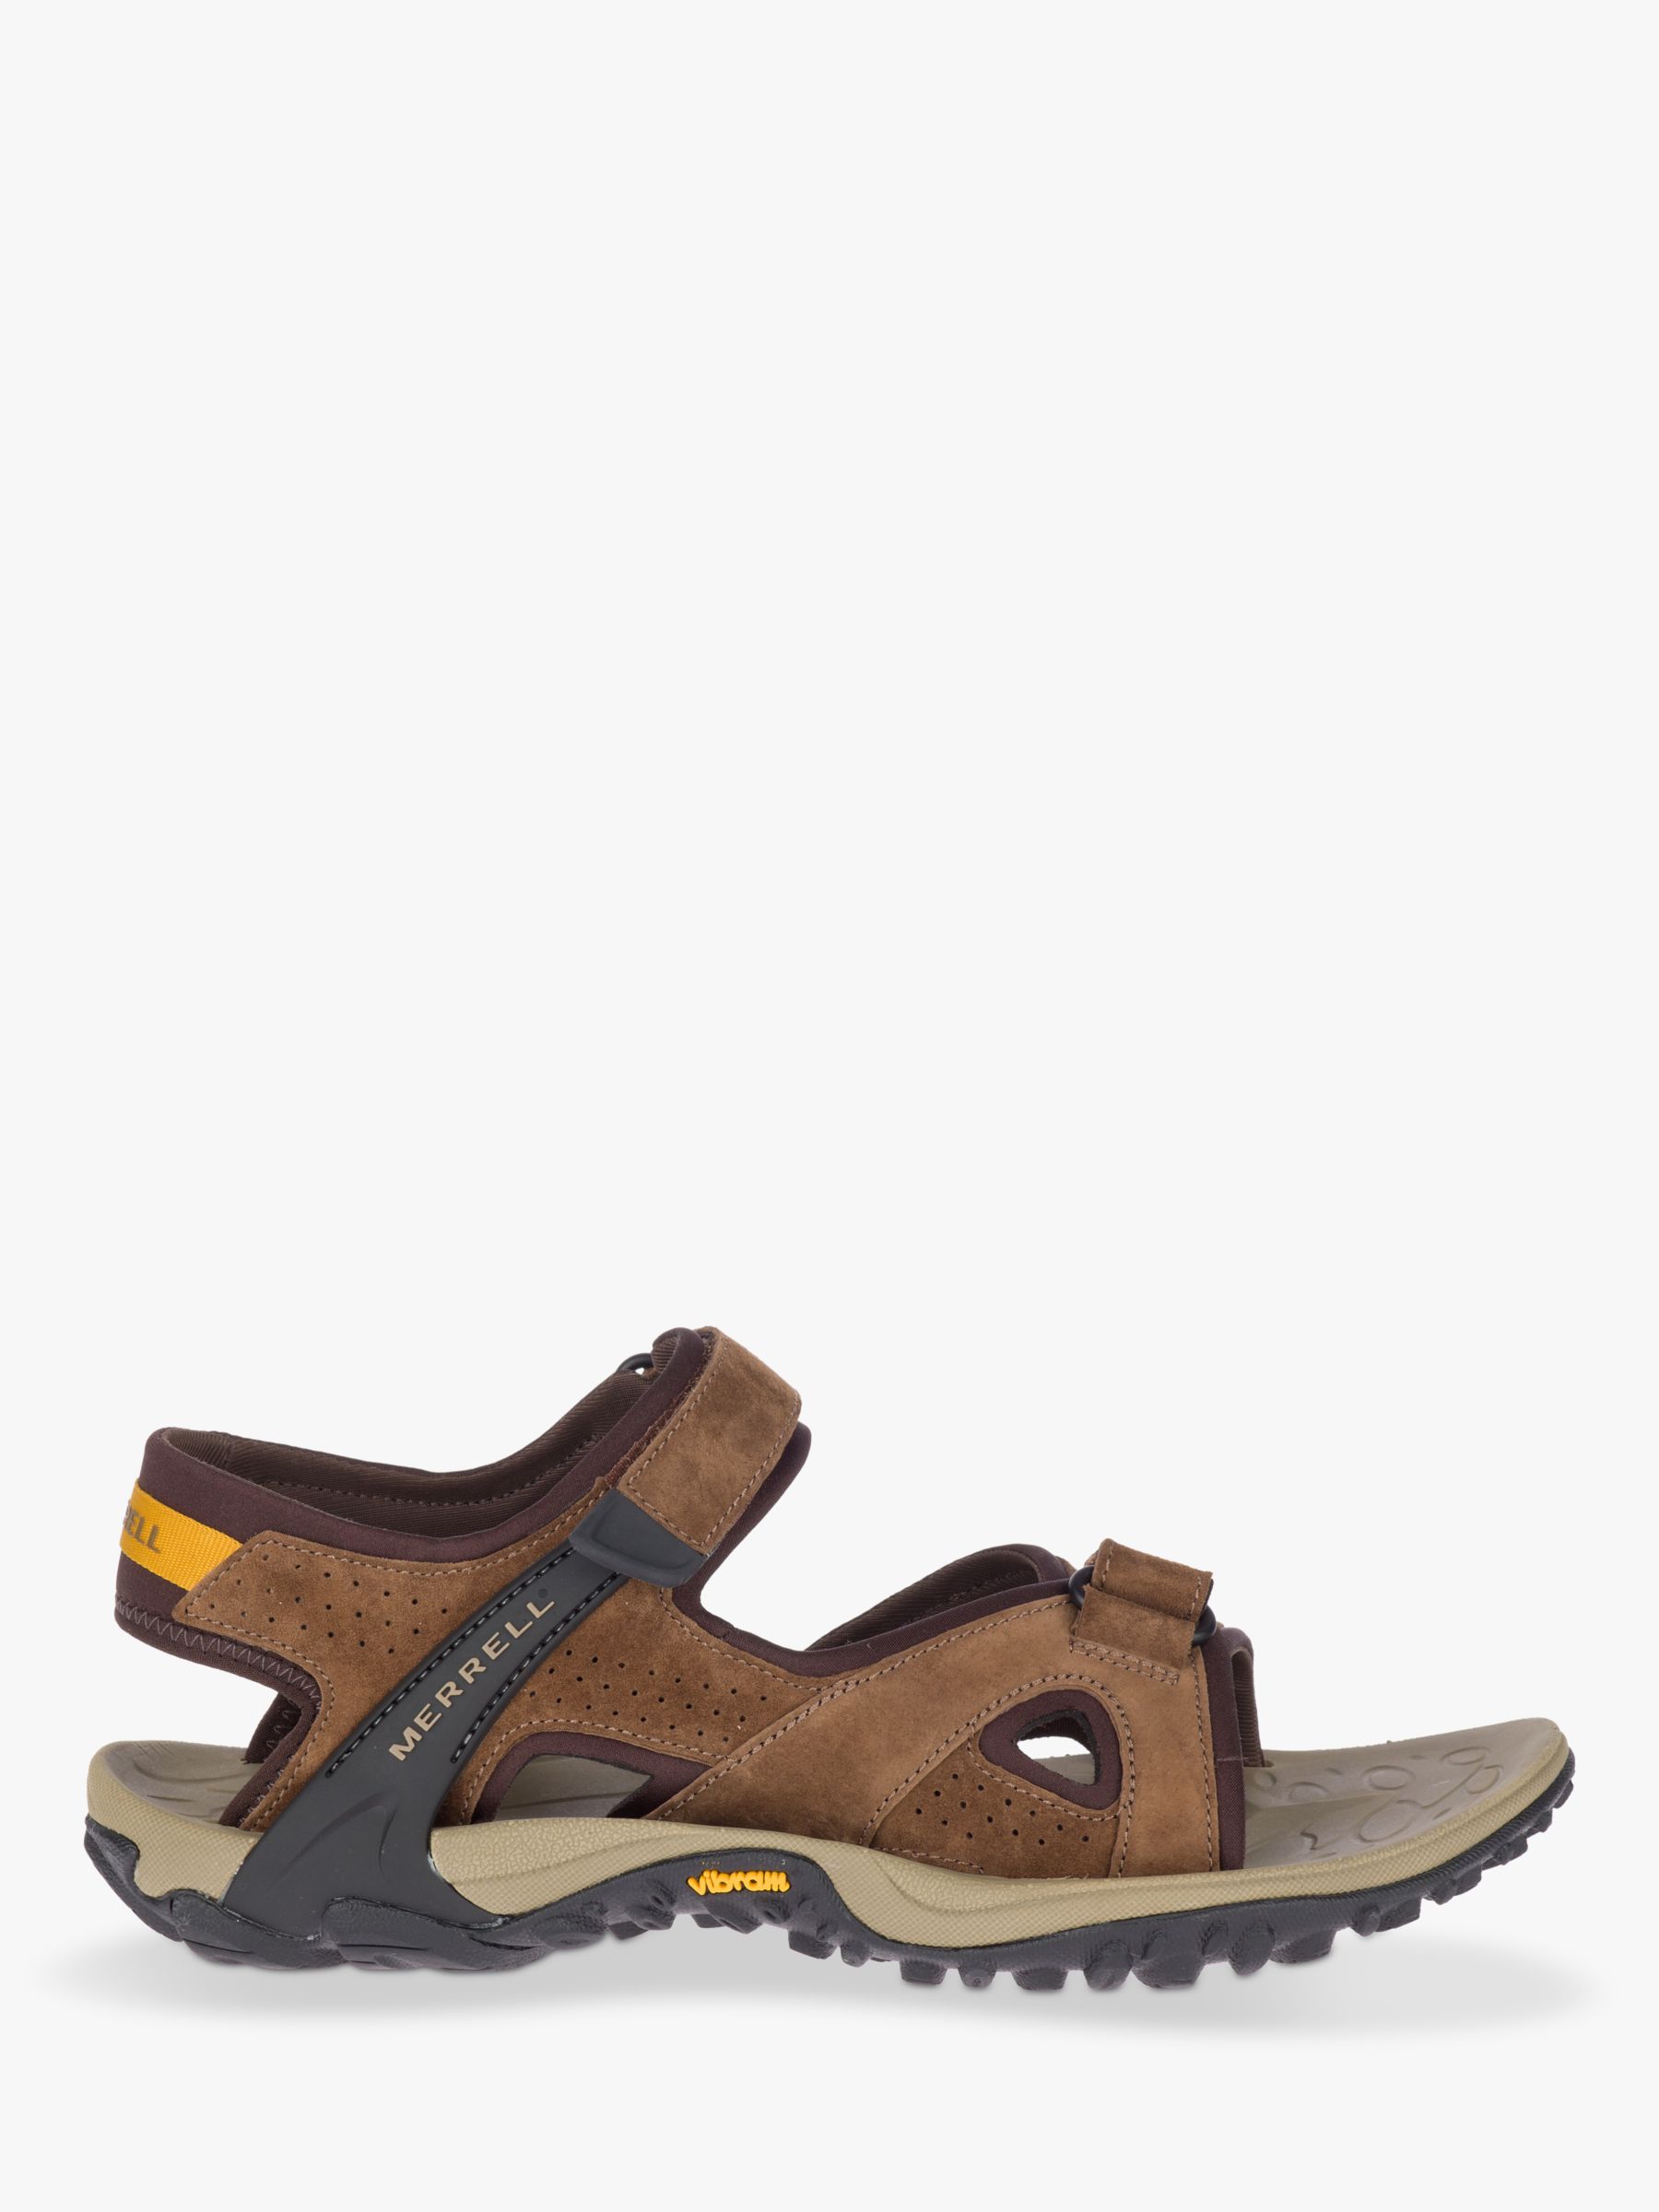 Merrell Kahuna Walking Sandals at Lewis Partners